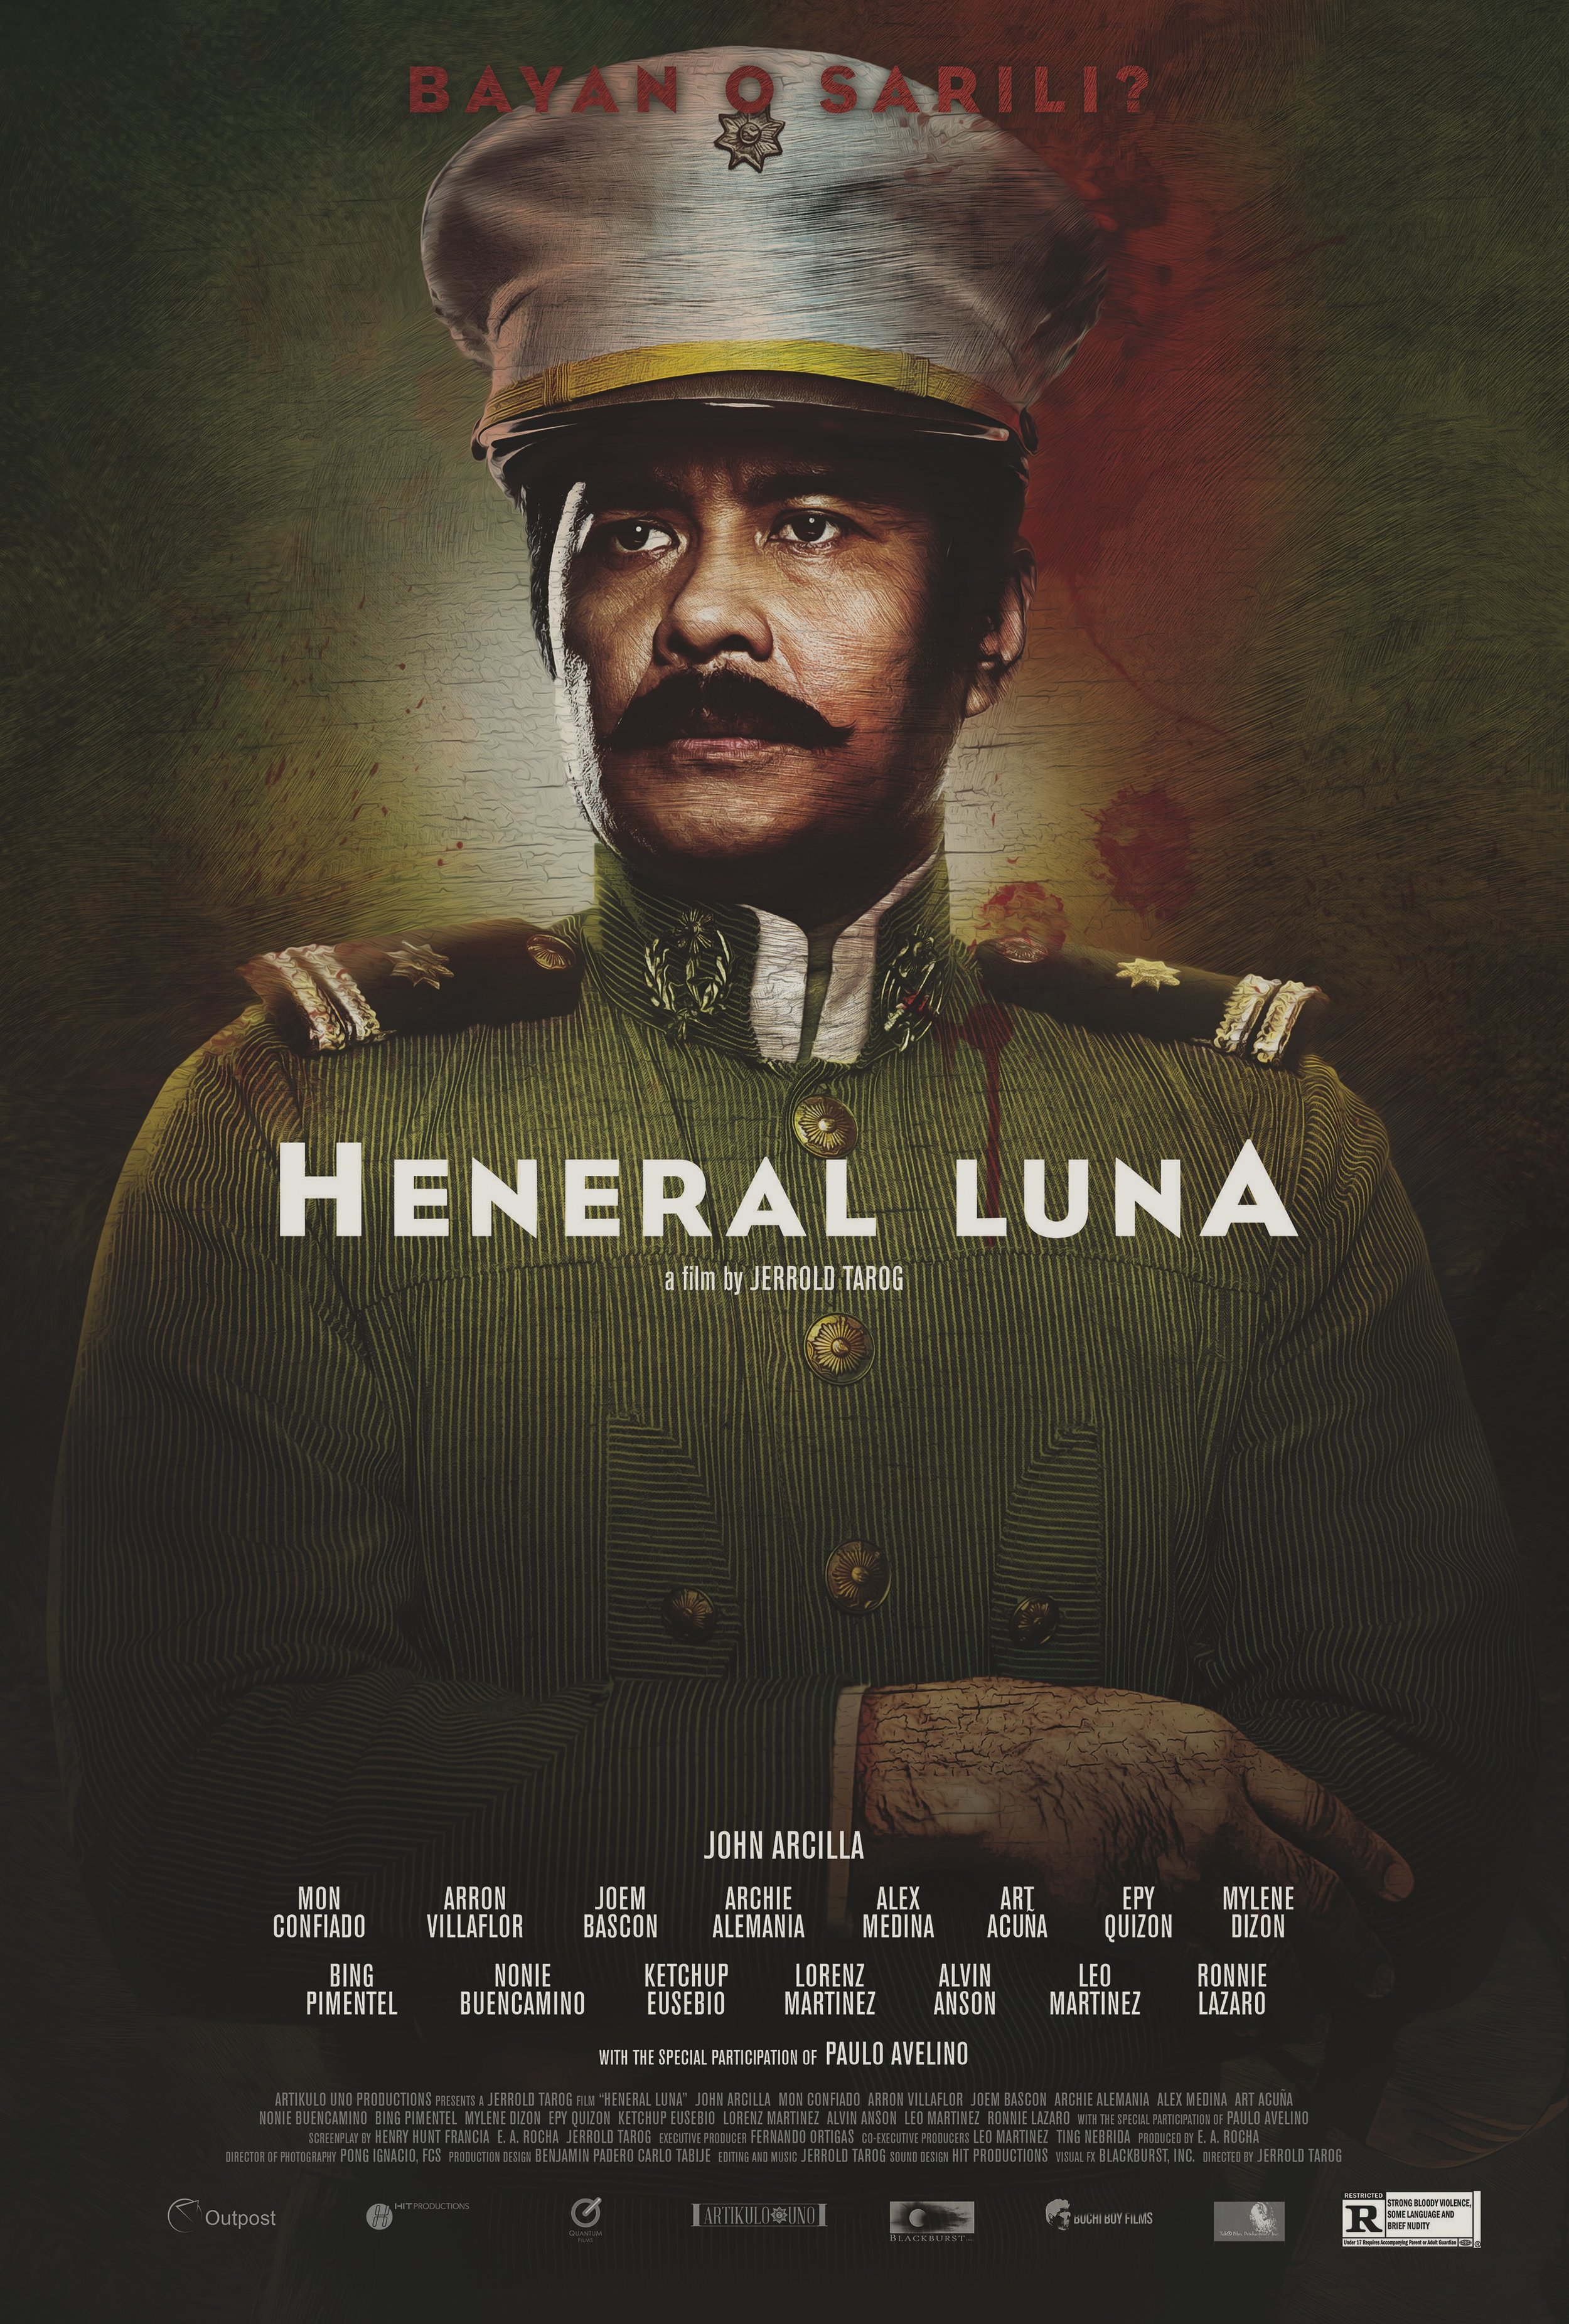 heneral luna movie review summary tagalog